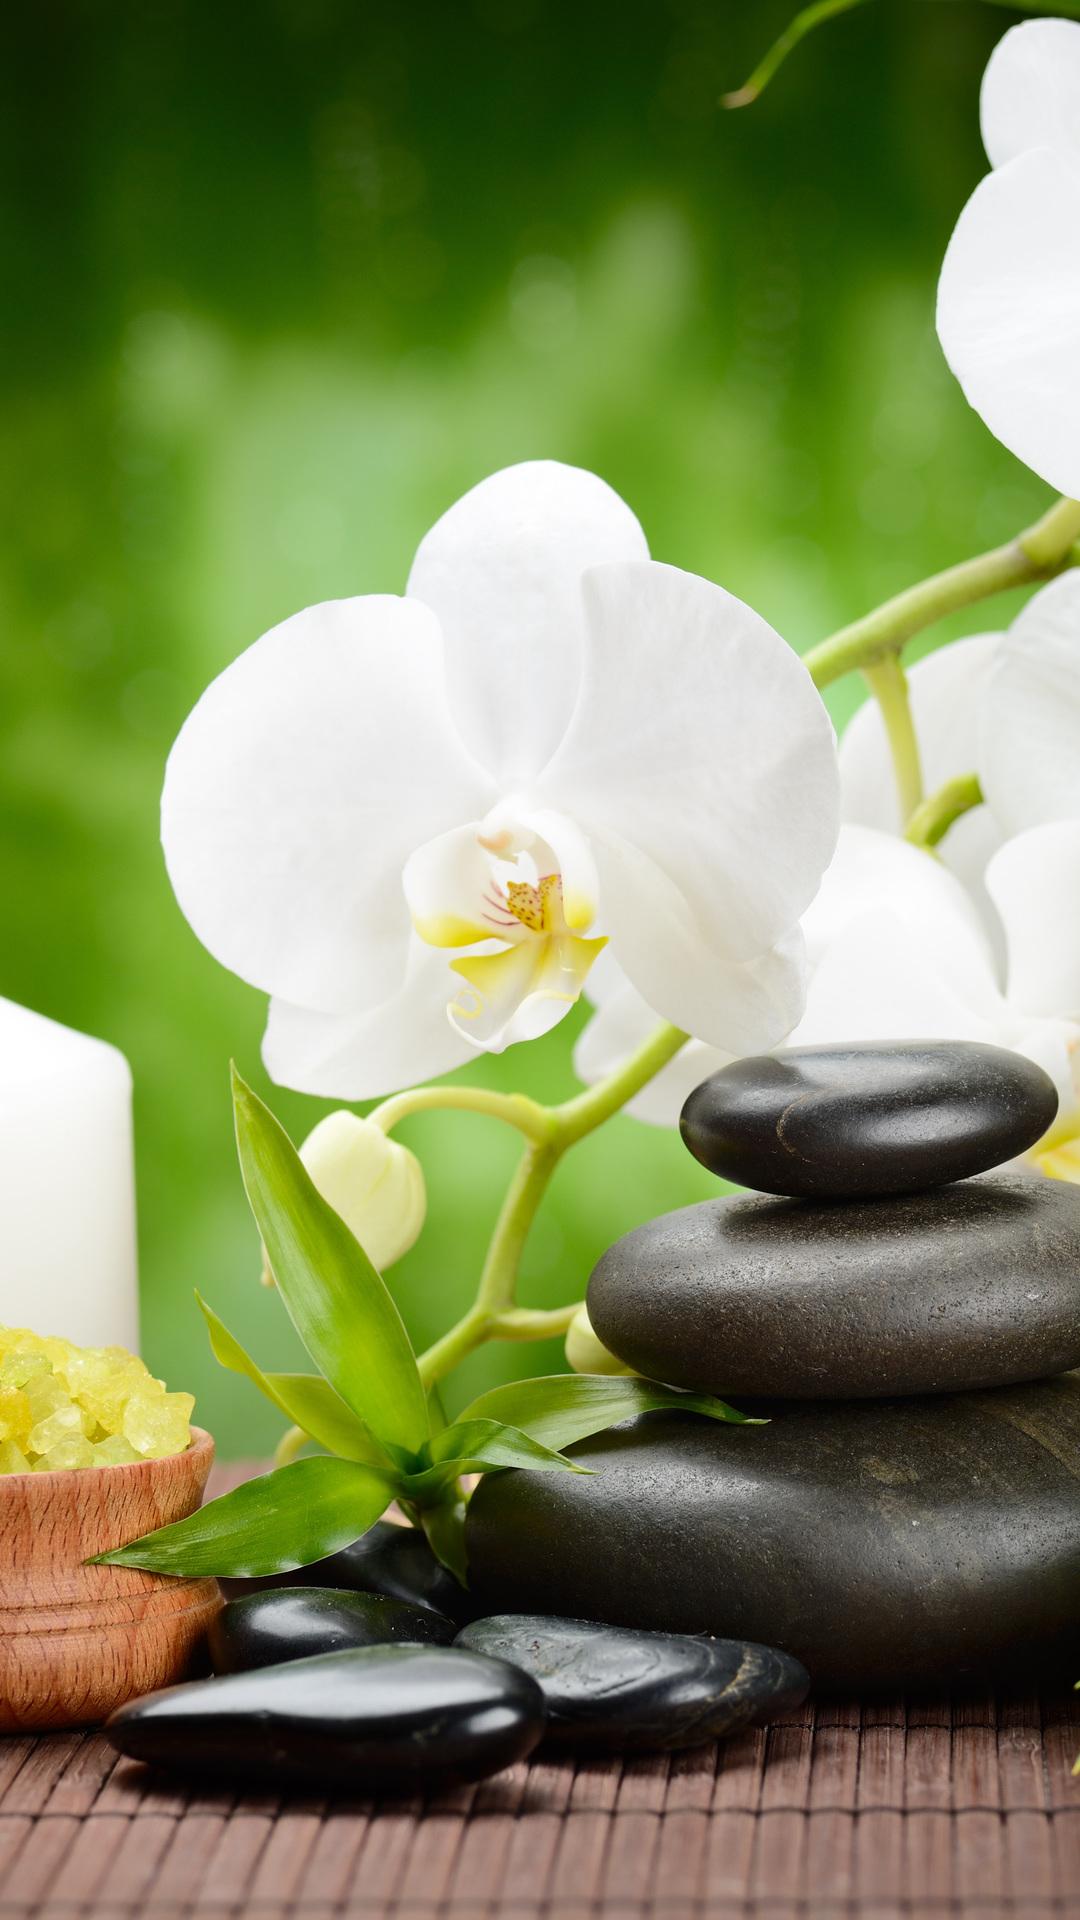 black, flower, massage, orchid, bamboo, spa, stones